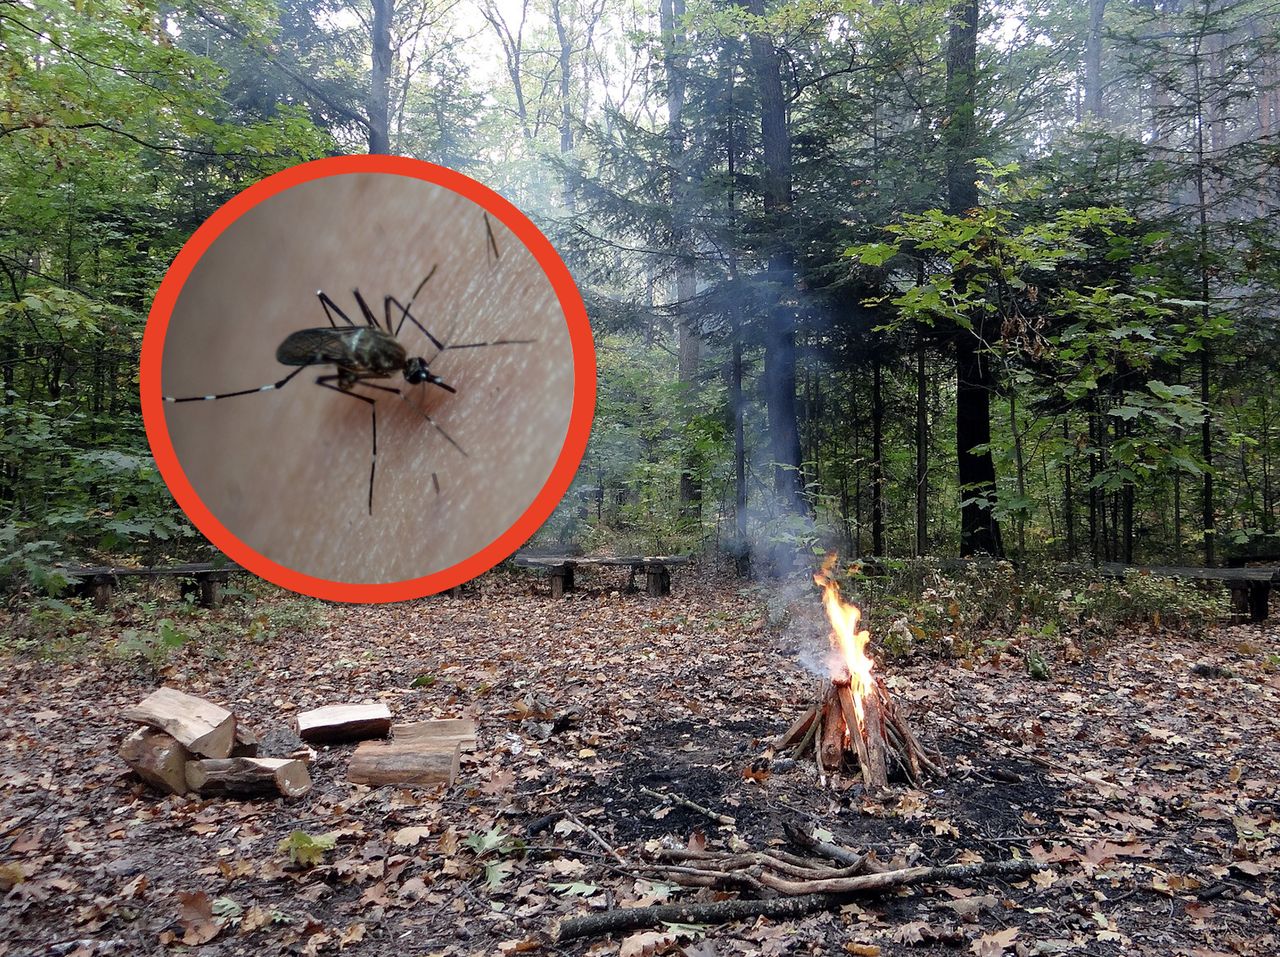 Mosquito magnet: Understanding why some individuals are bitten more